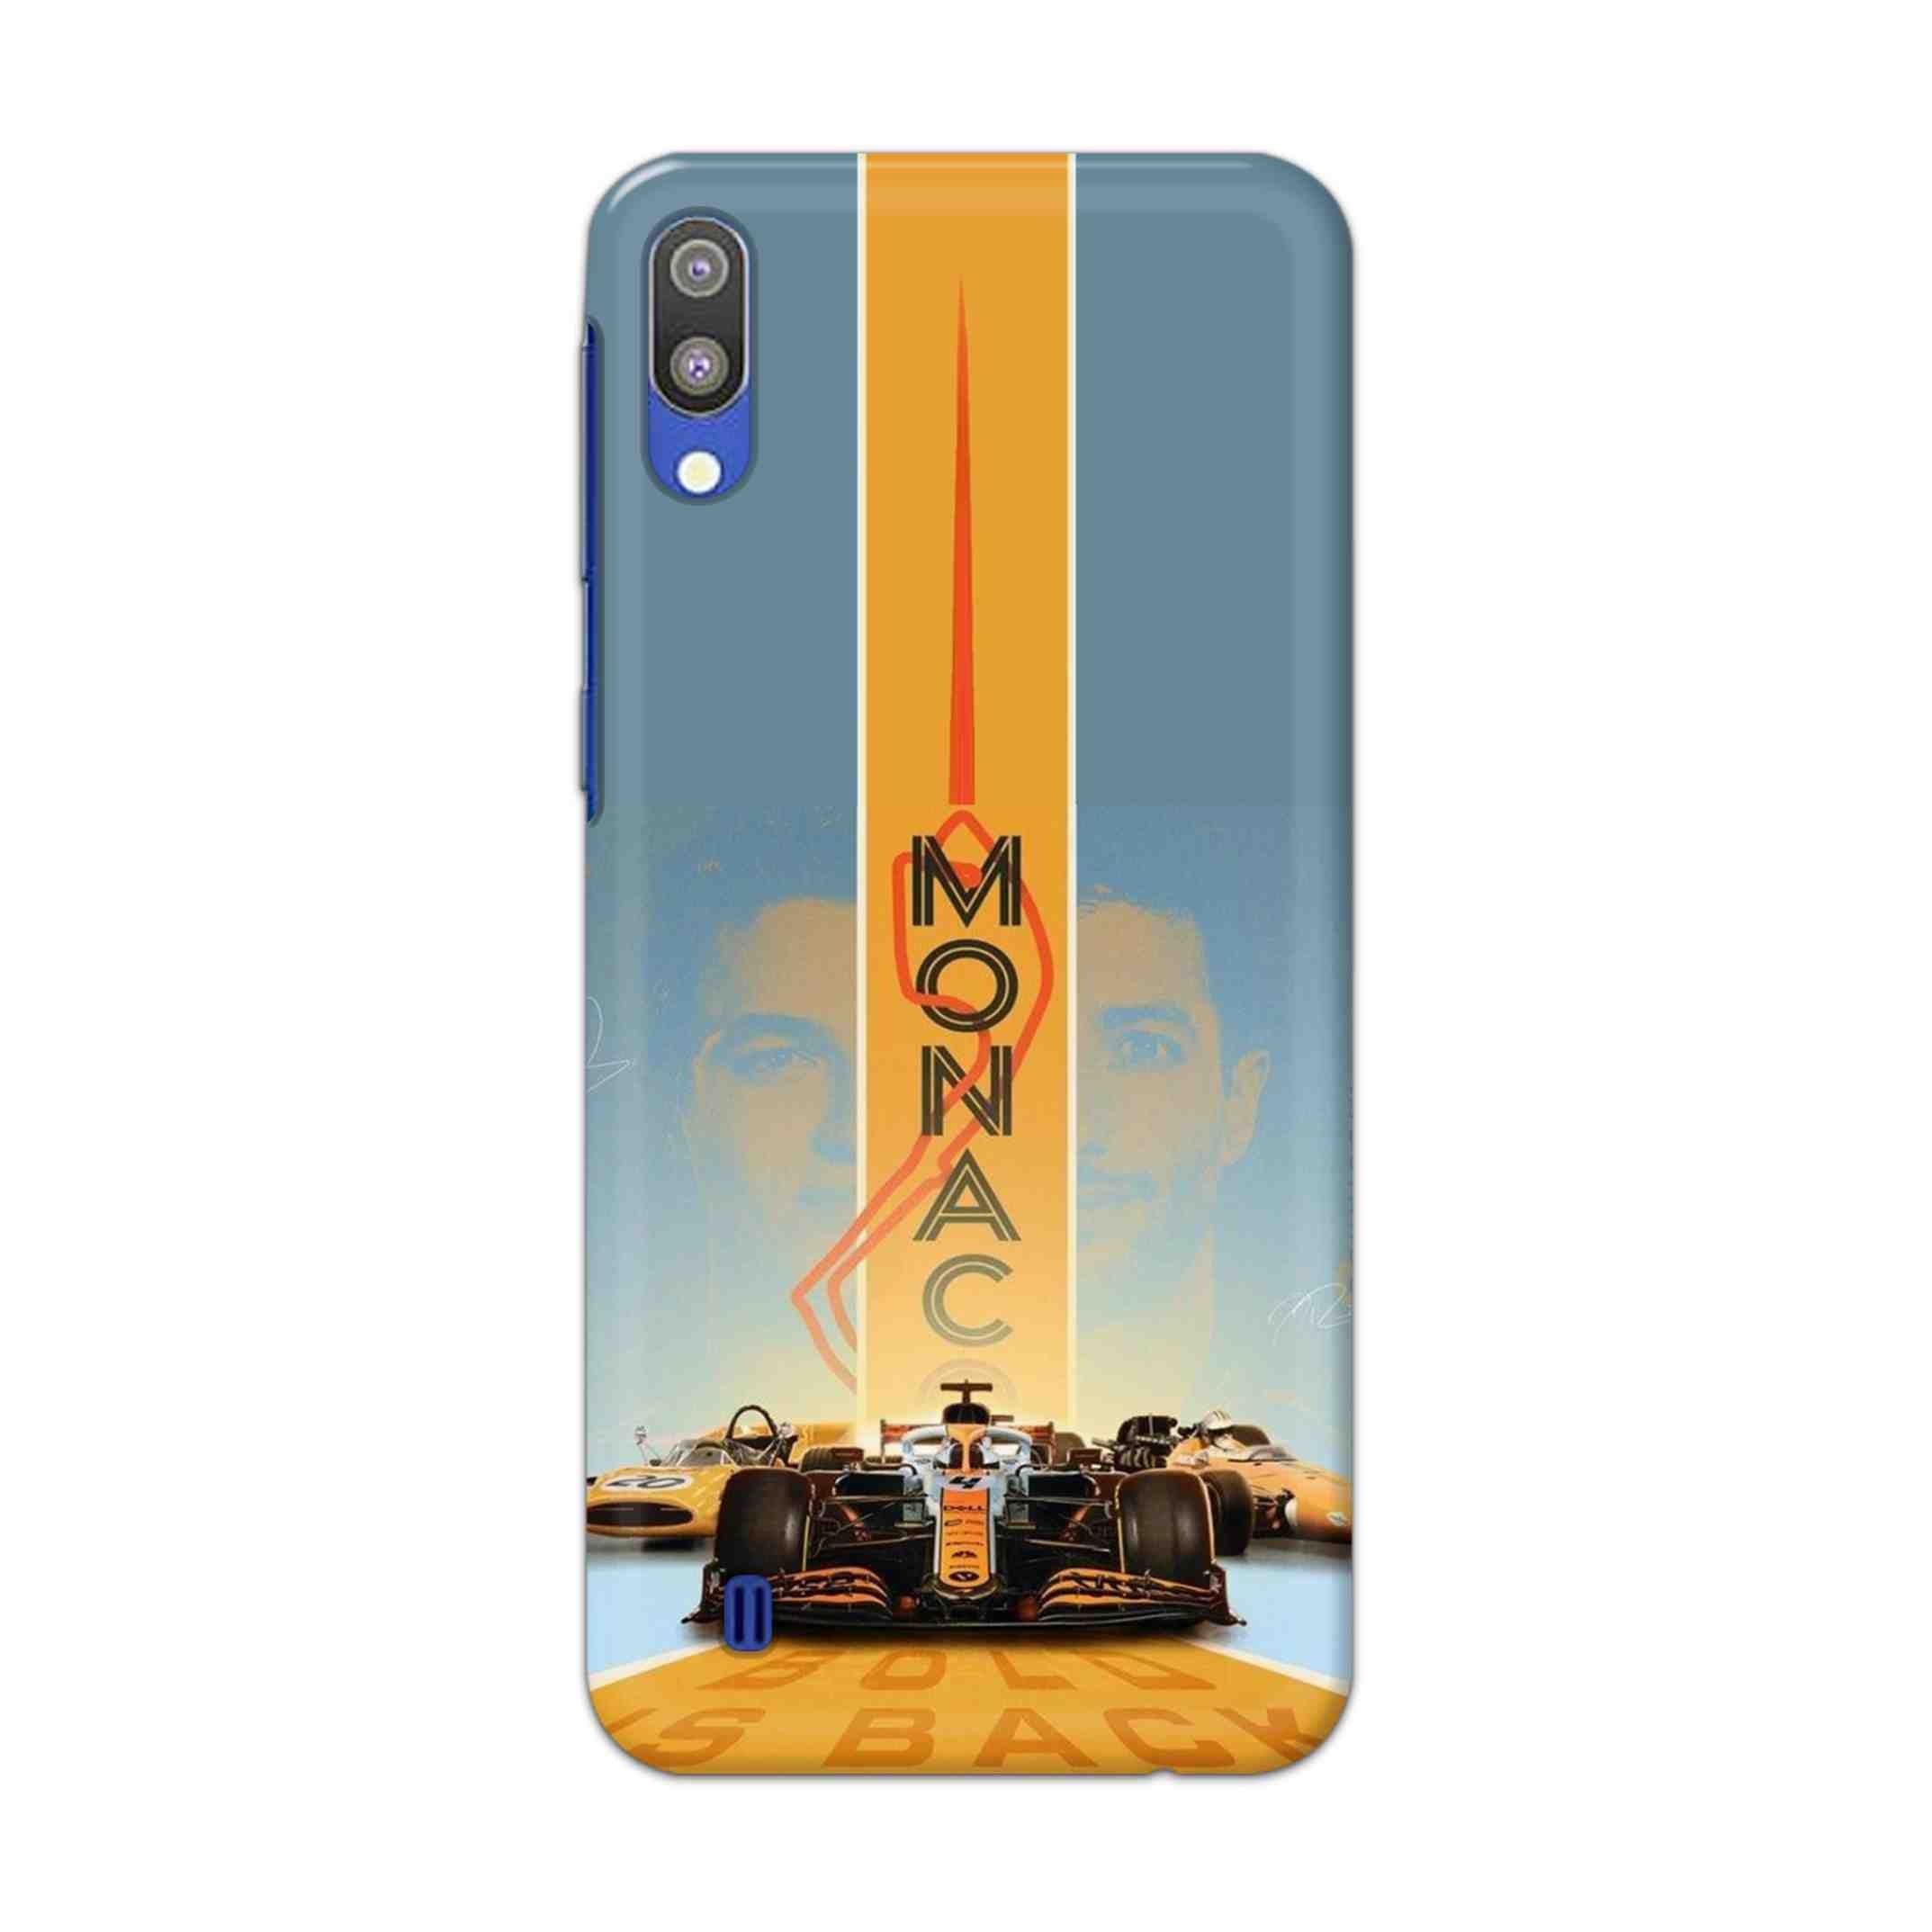 Buy Monac Formula Hard Back Mobile Phone Case Cover For Samsung Galaxy M10 Online